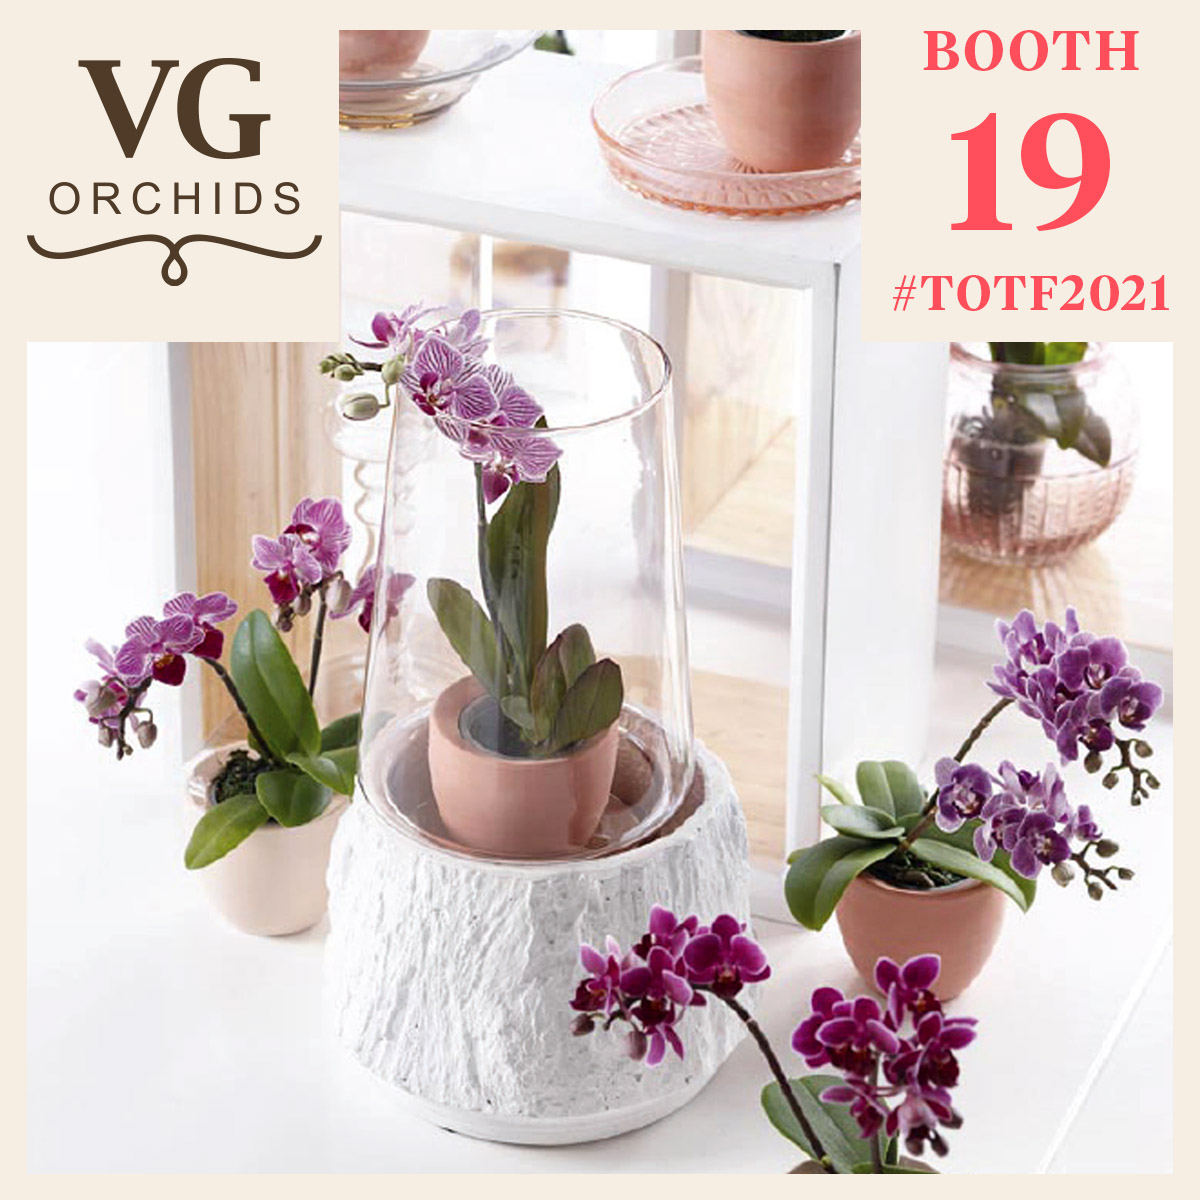 vg-orchids-presents-tiny-dolls-featured